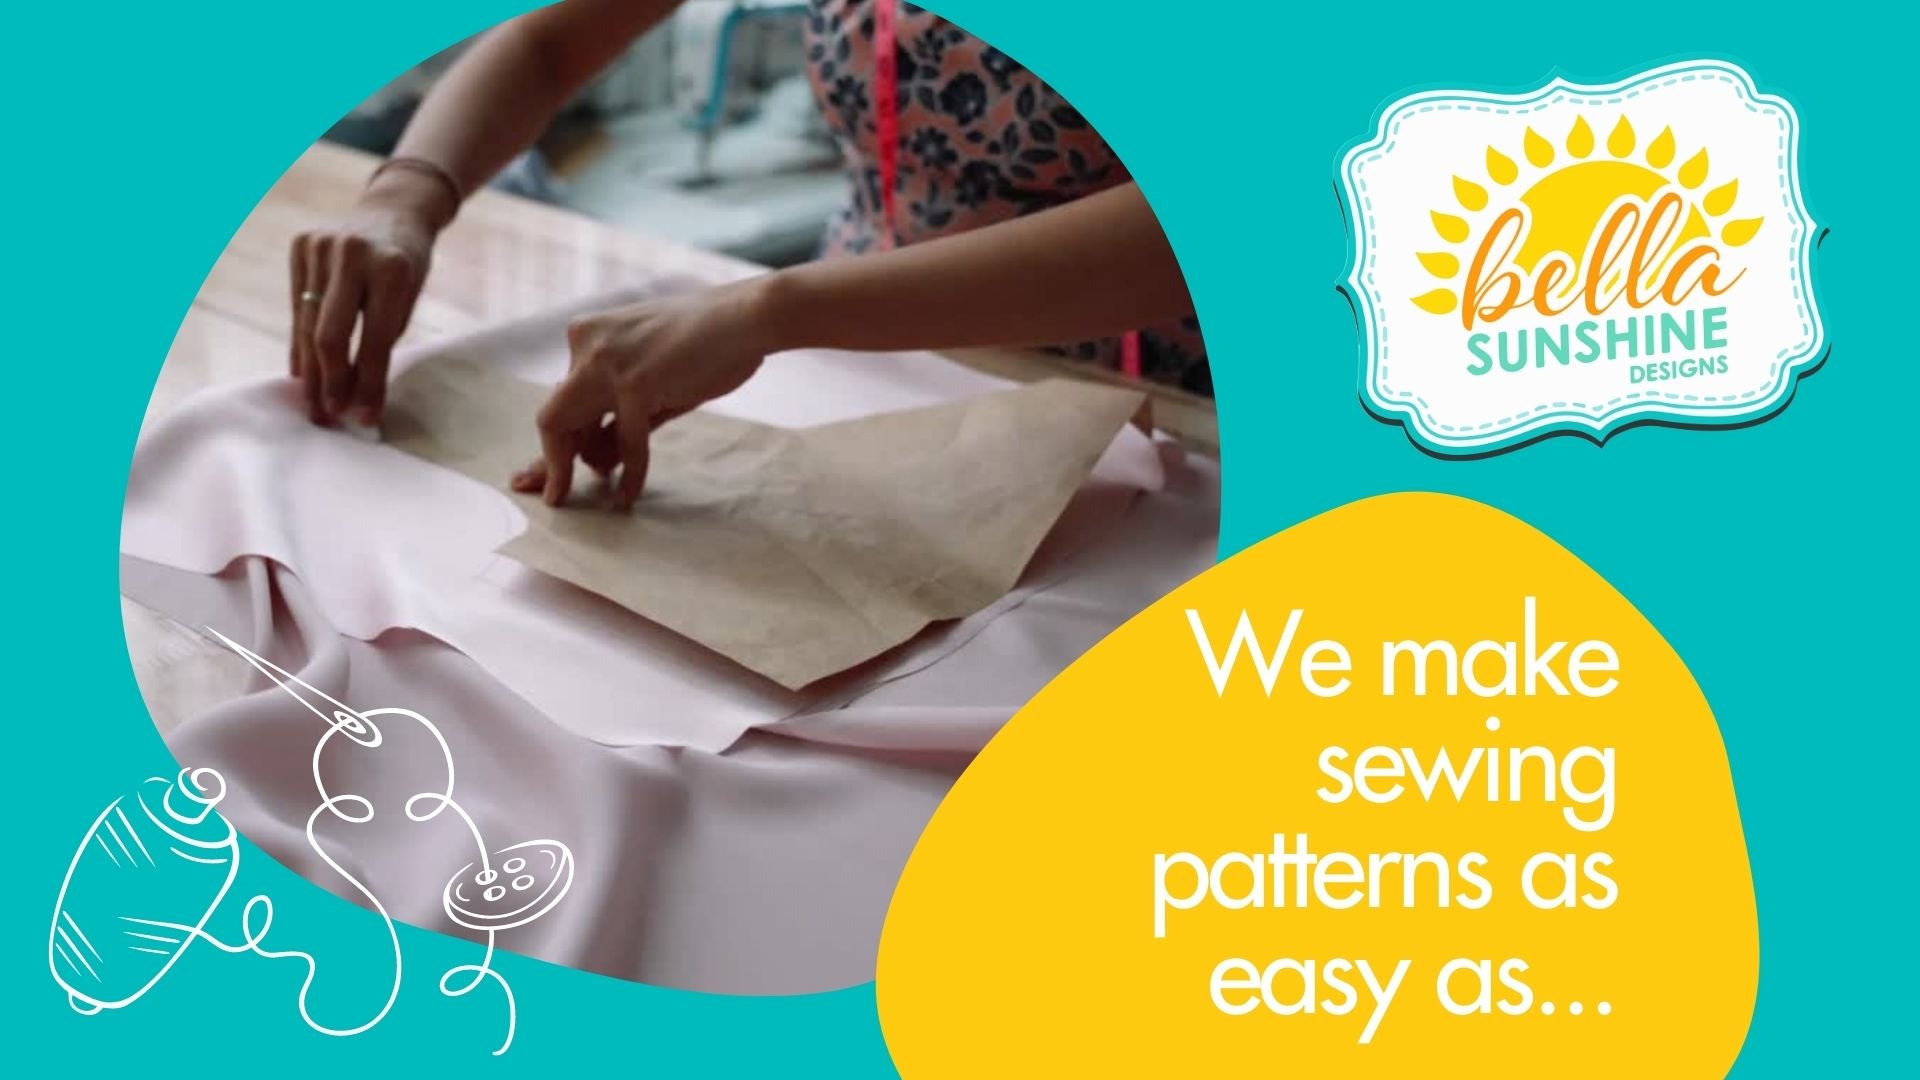 Load video: We make sewing patterns as easy as print, tape, and sew.